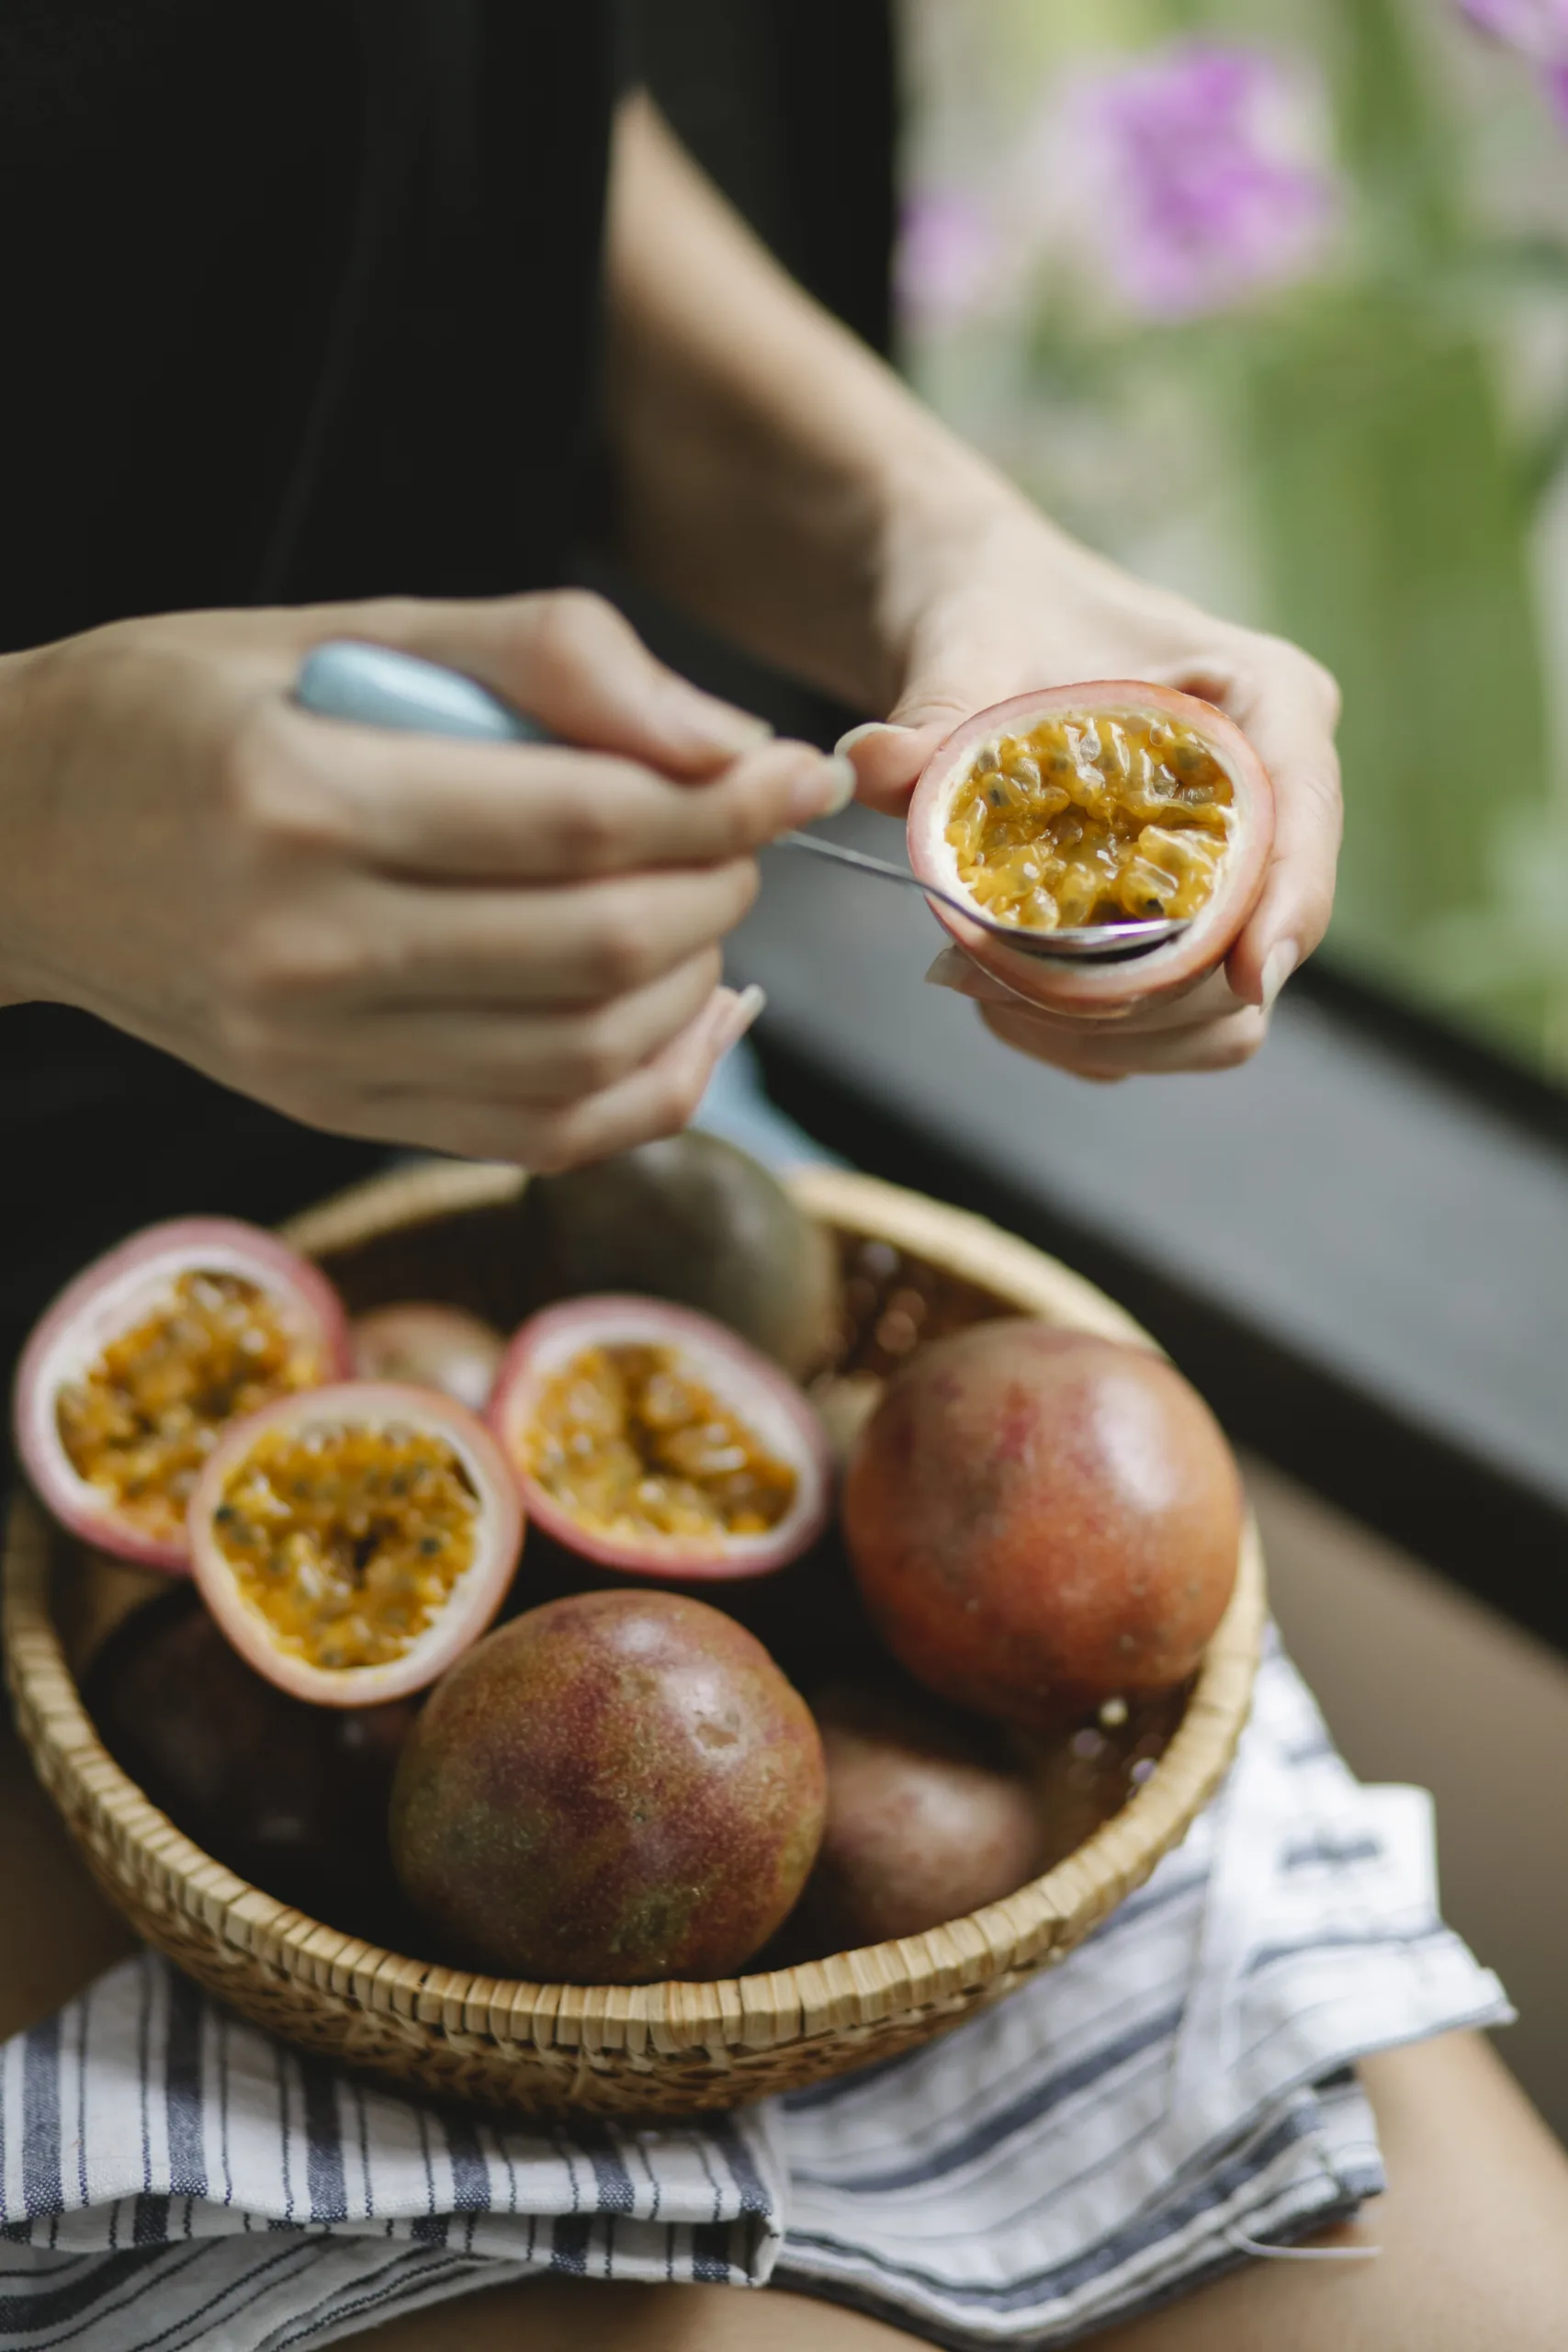 Indulge in the Exquisite Flavors of Passion Fruit: Learn How to Eat it Like a Pro